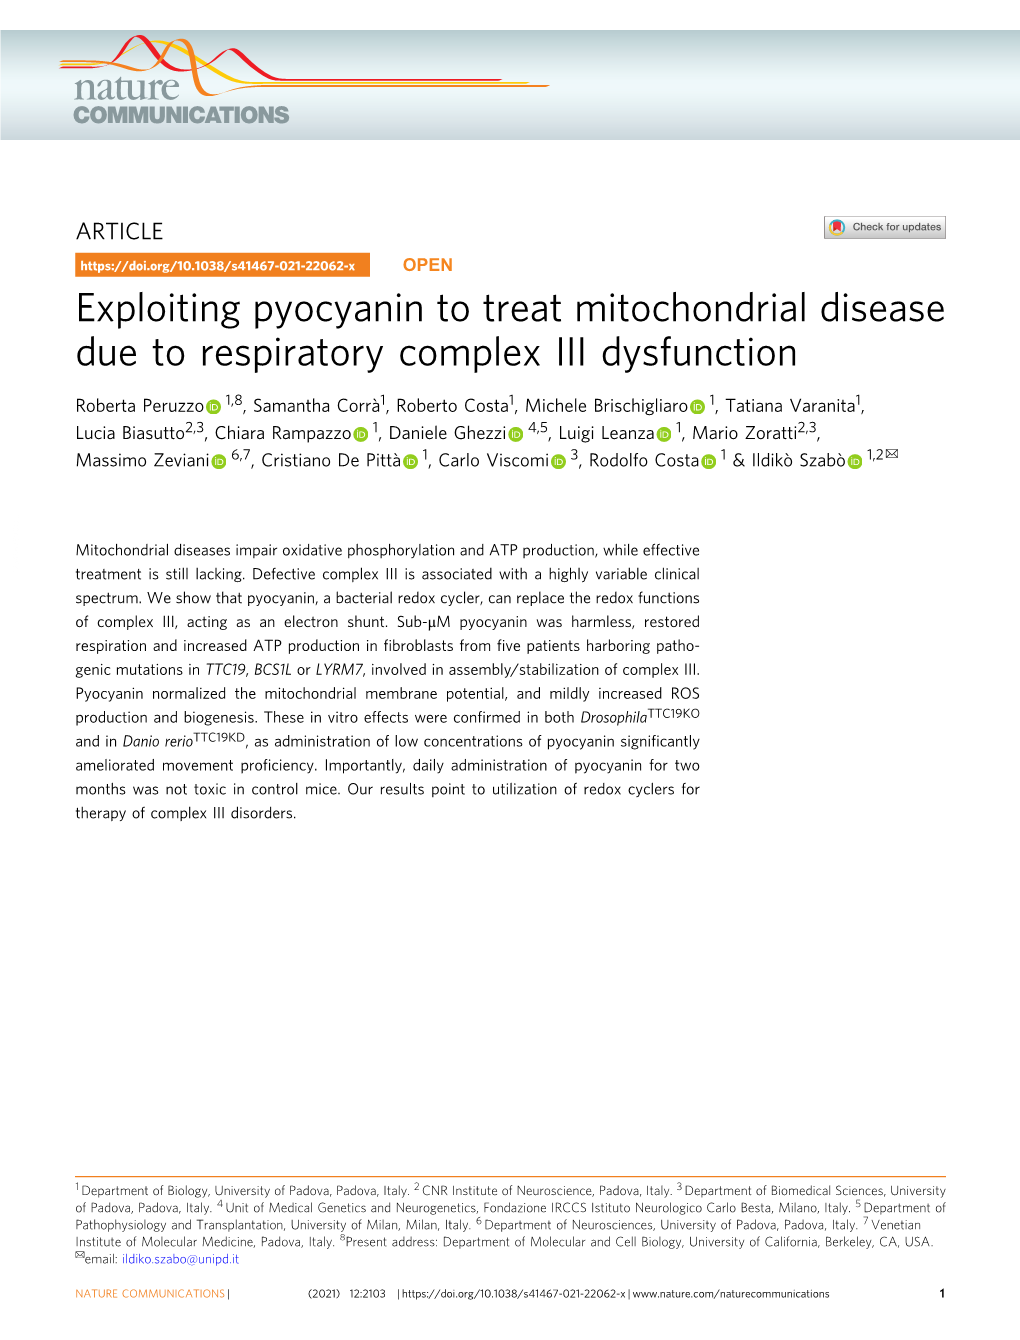 Exploiting Pyocyanin to Treat Mitochondrial Disease Due to Respiratory Complex III Dysfunction